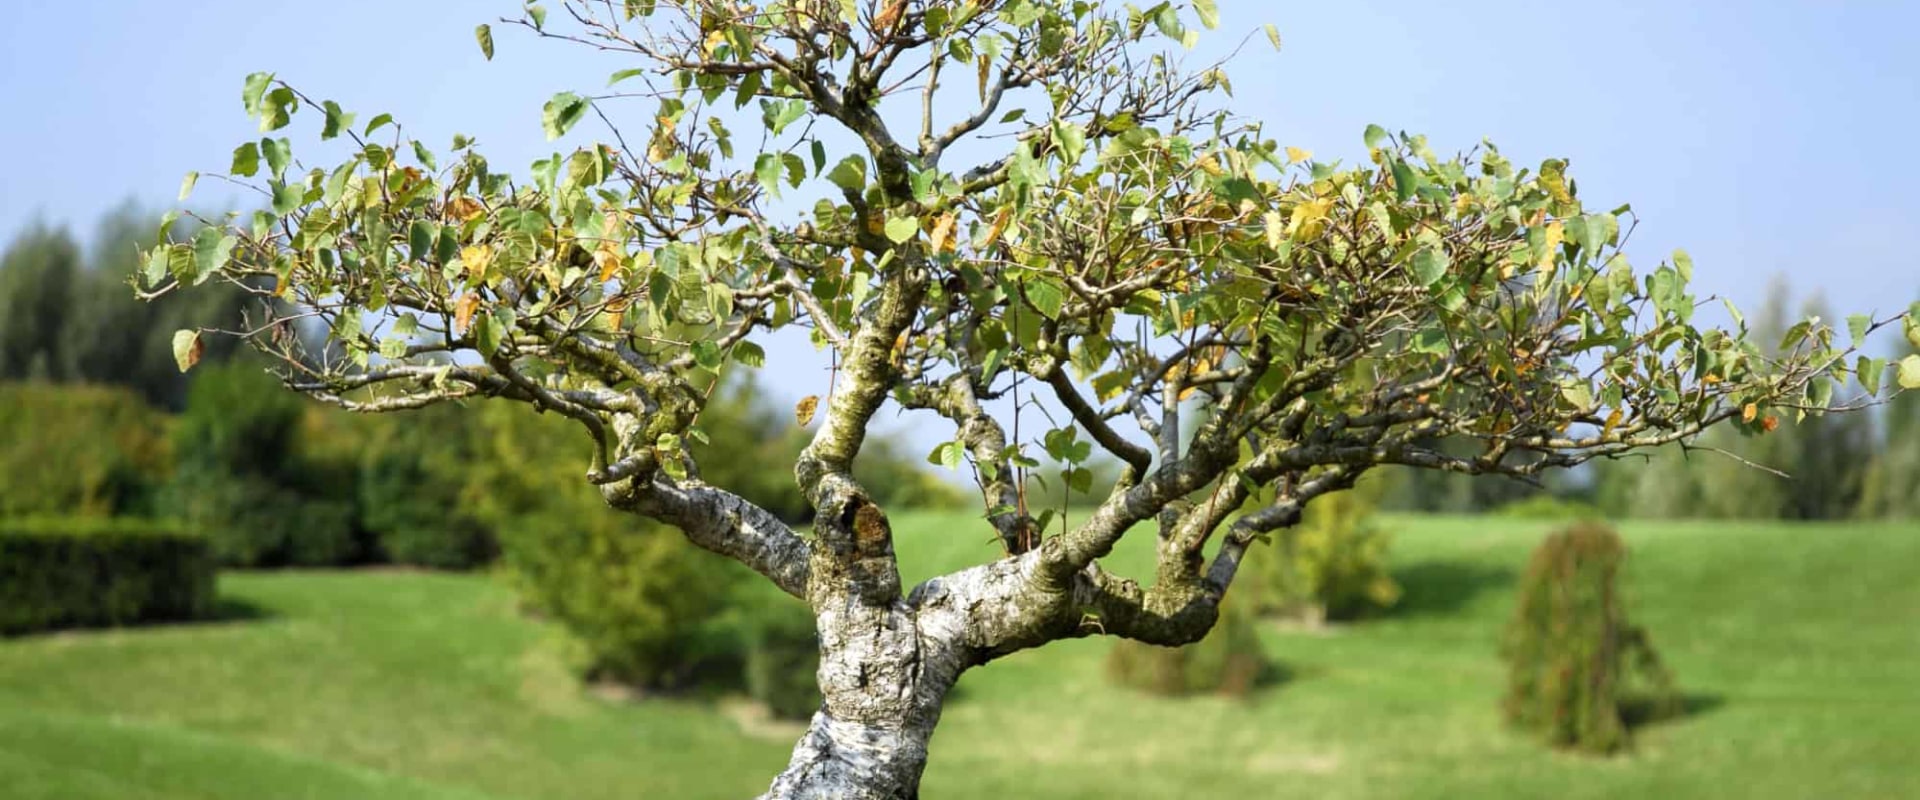 Birch Bonsai Trees: Everything You Need to Know